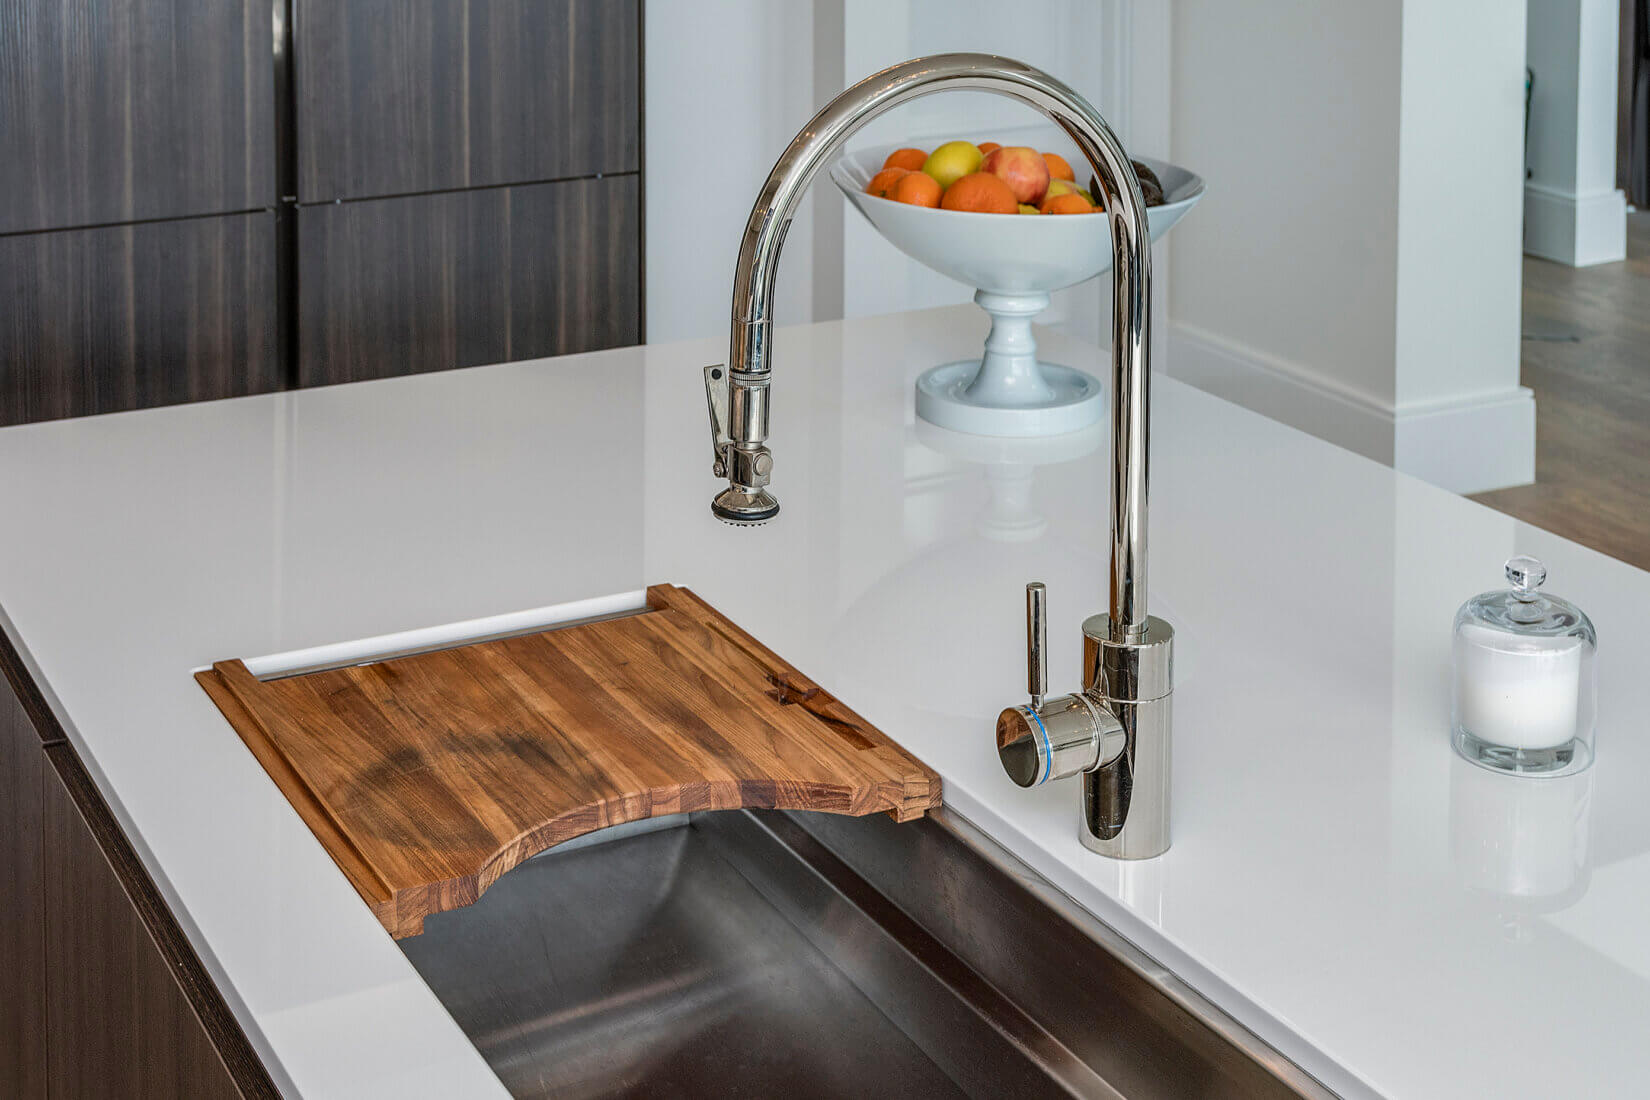 Closeup of pulldown spray faucet and built-in cutting board in kitchen